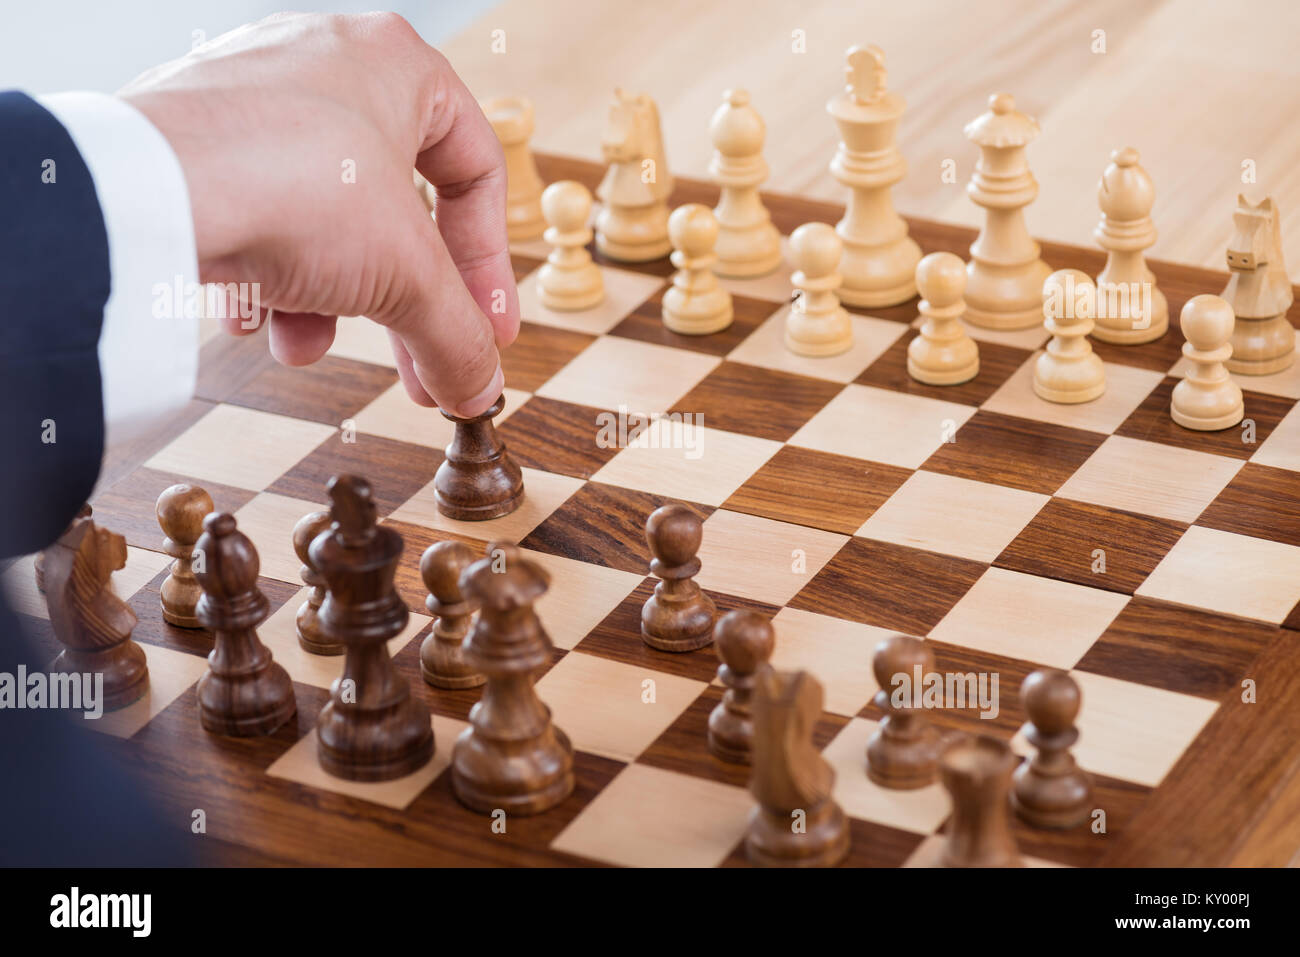 partial view of businessman holding chess figure while playing chess alone Stock Photo